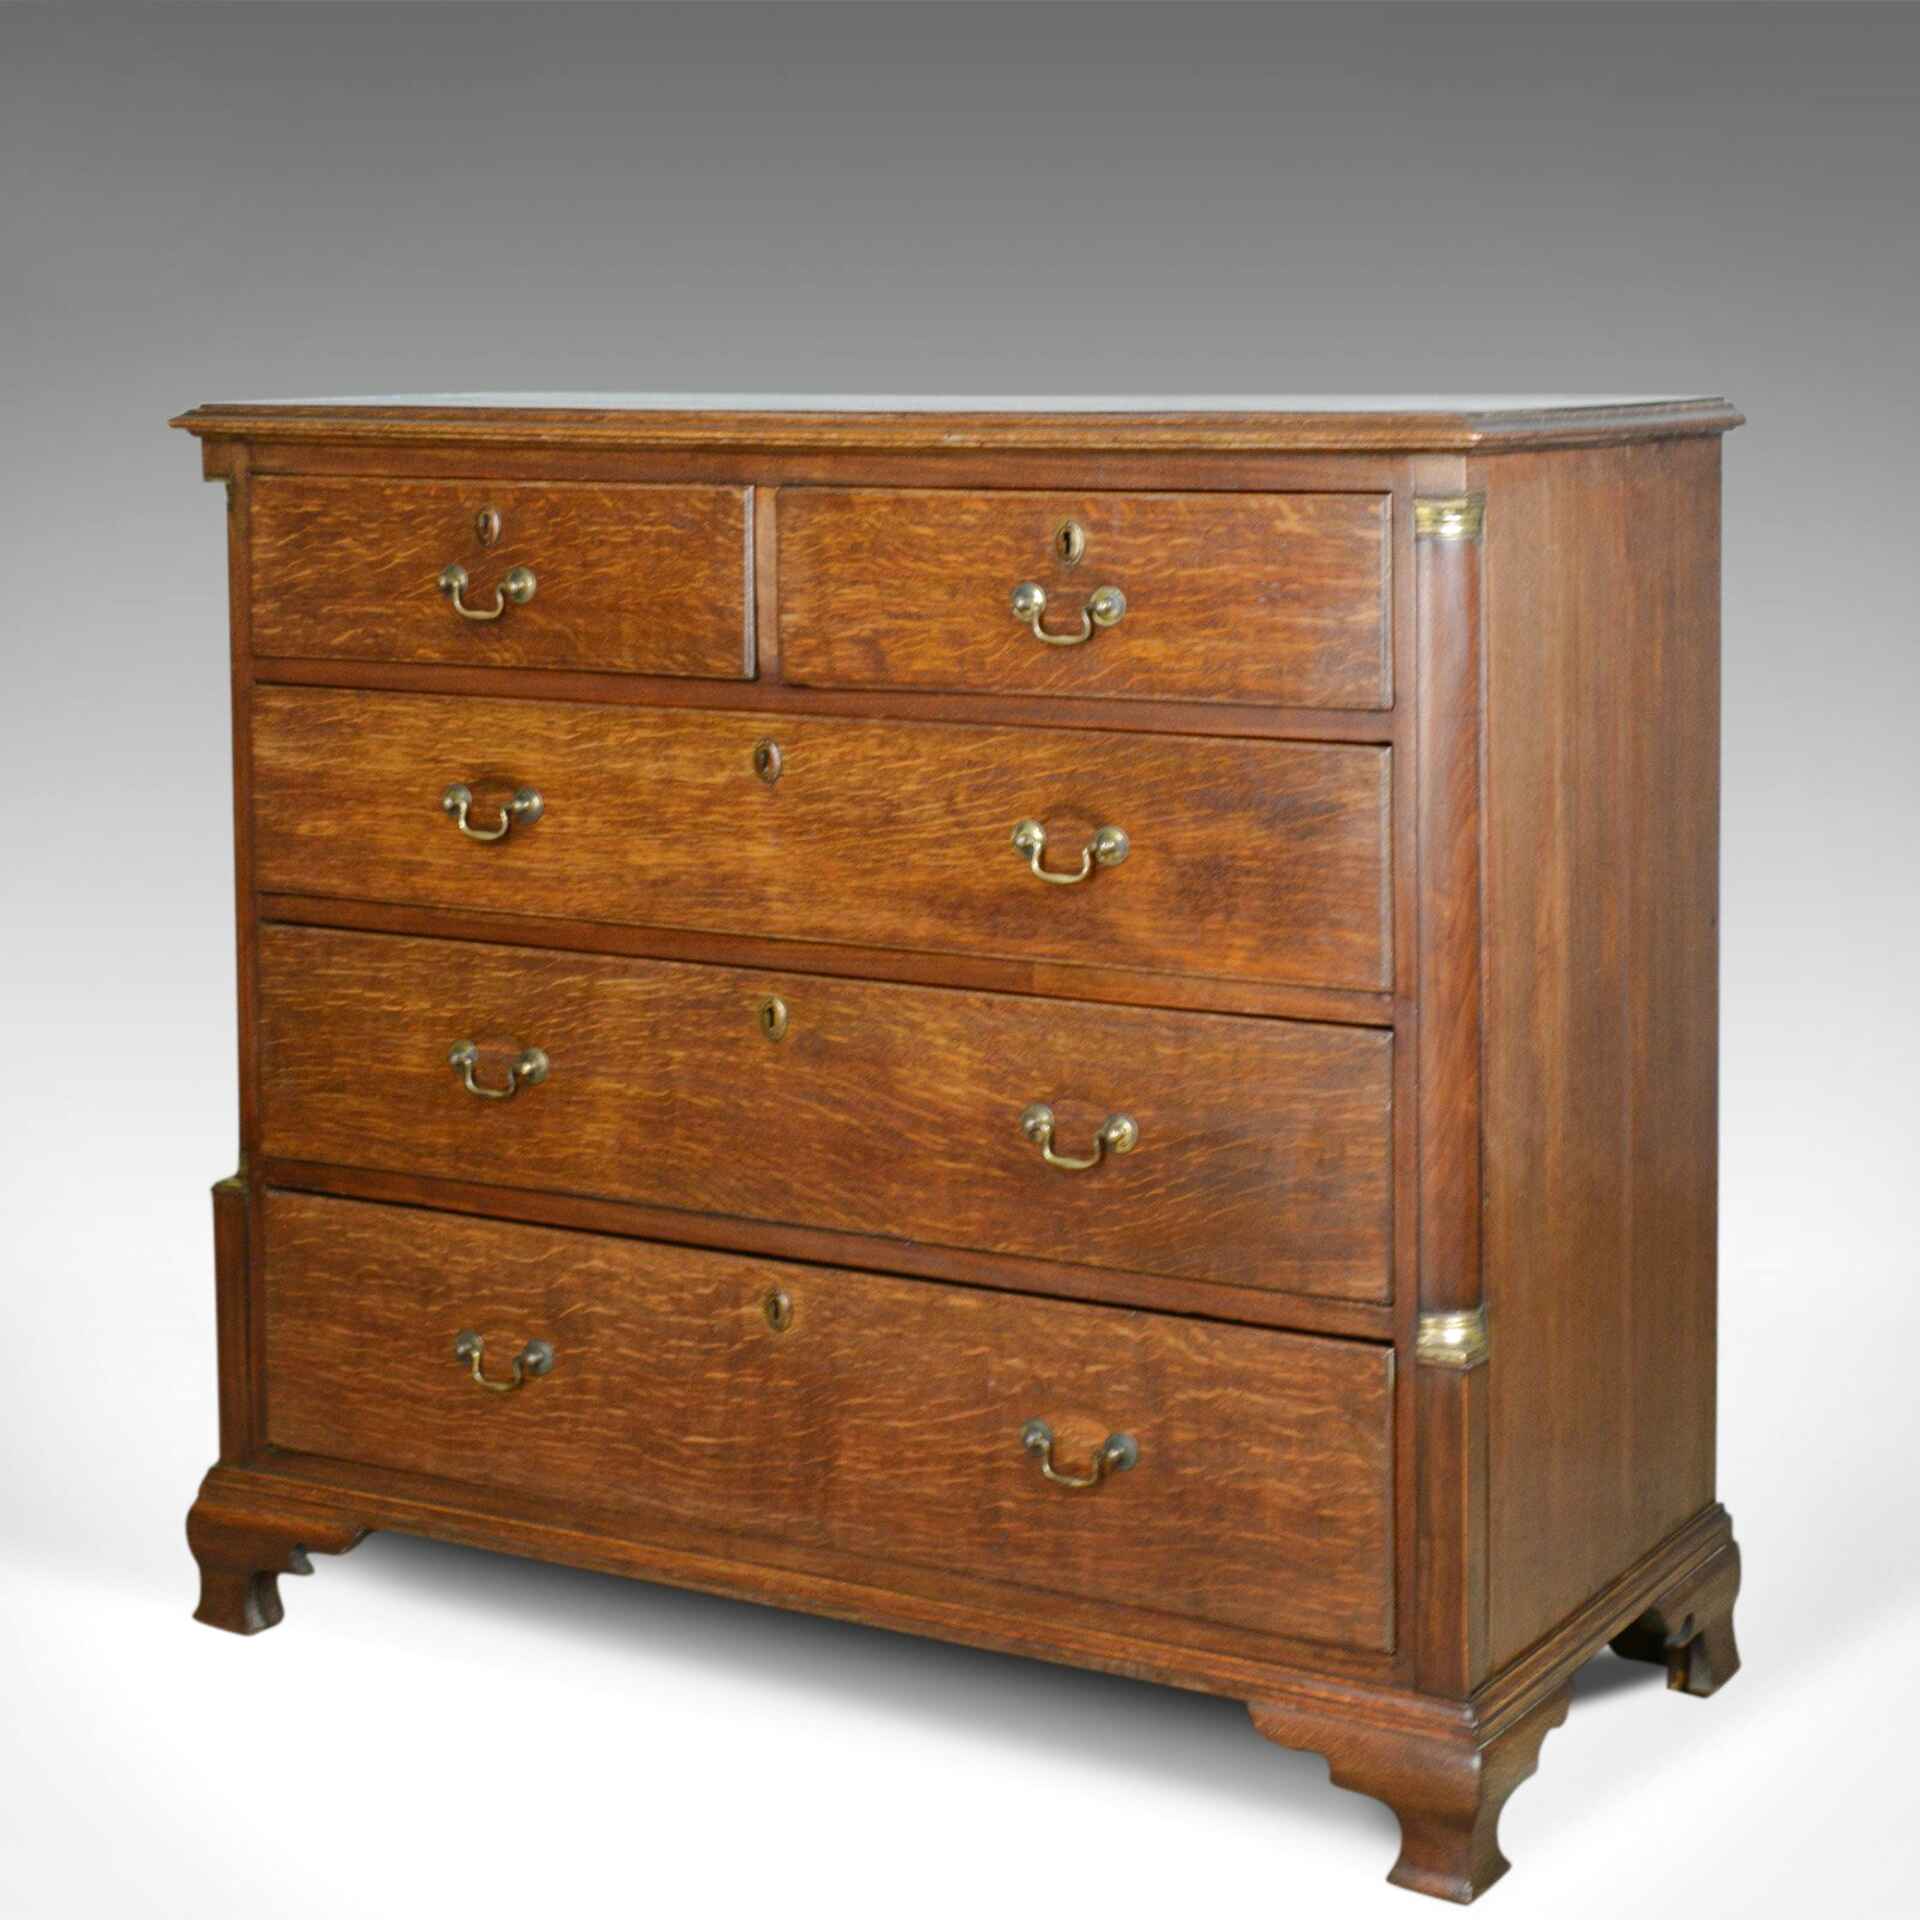 Second hand Antique Chest Drawers in Ireland 57 used Antique Chest